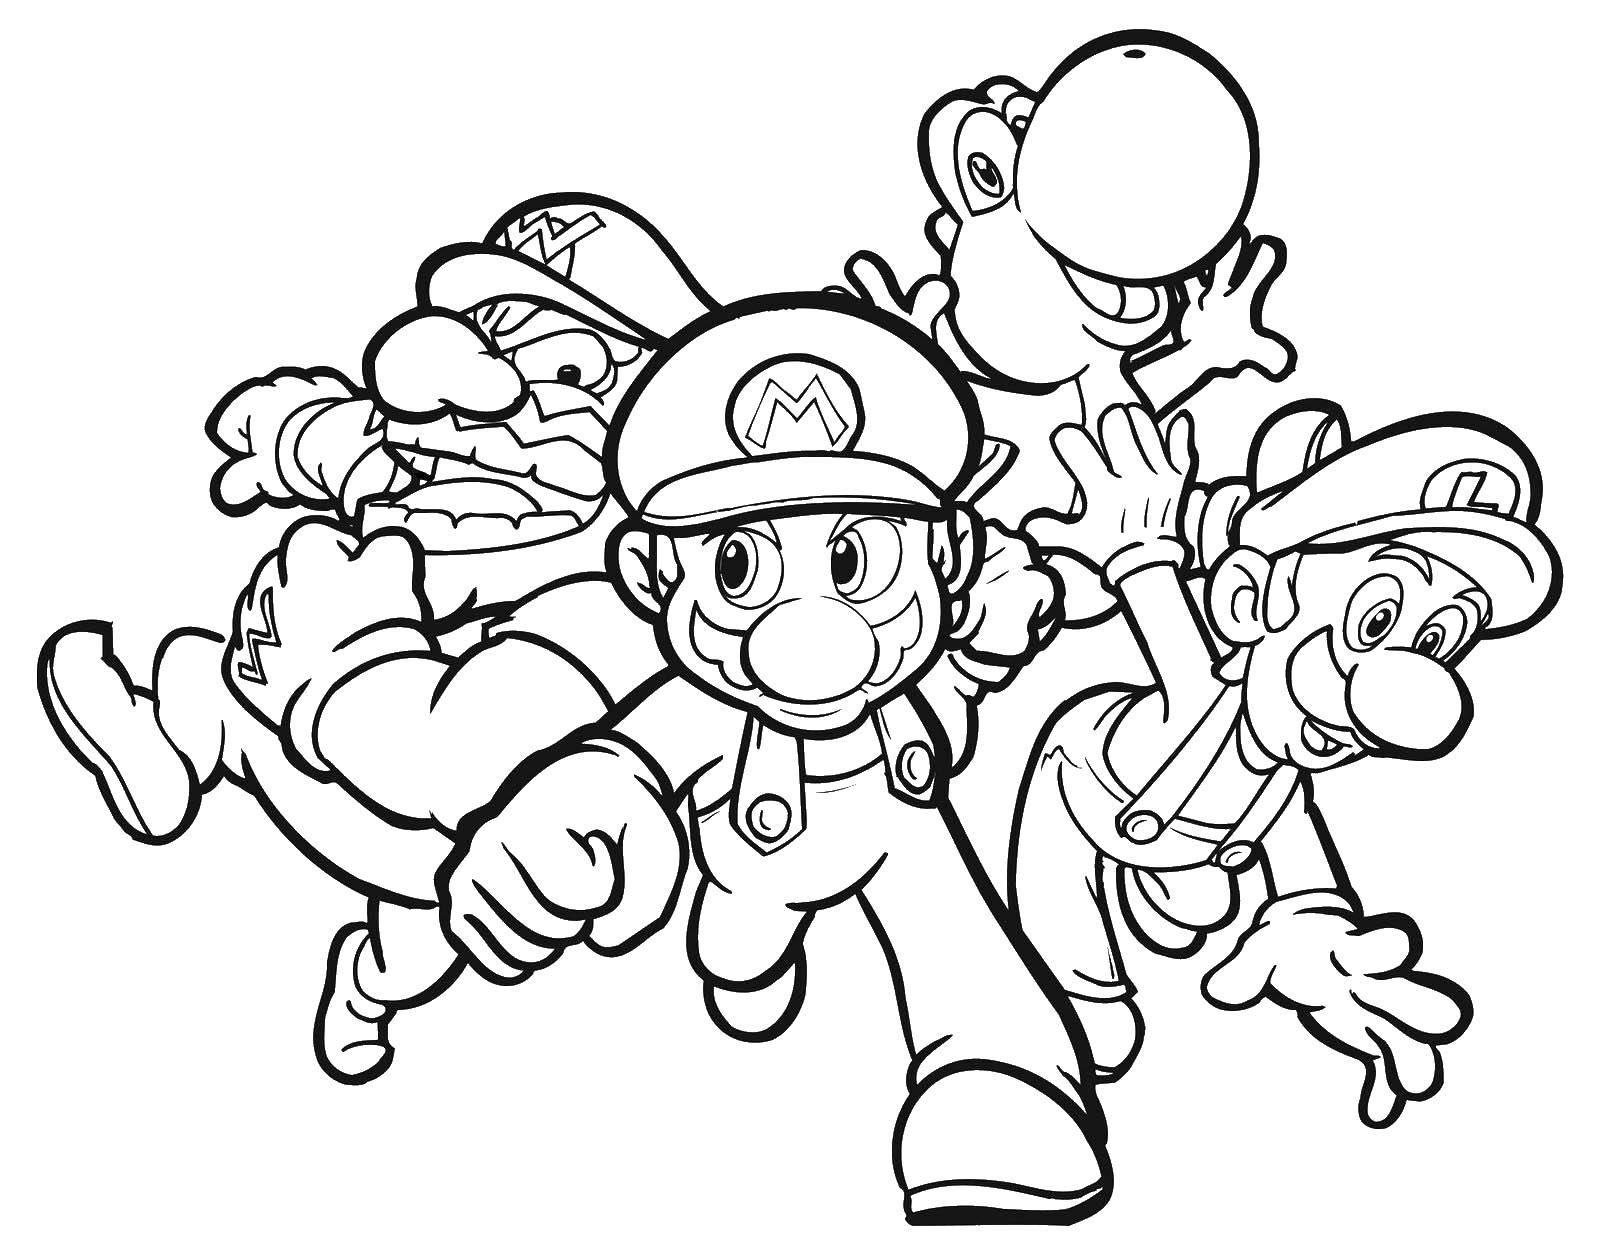 Coloring Super Mario. Category The character from the game. Tags:  Super Mario.